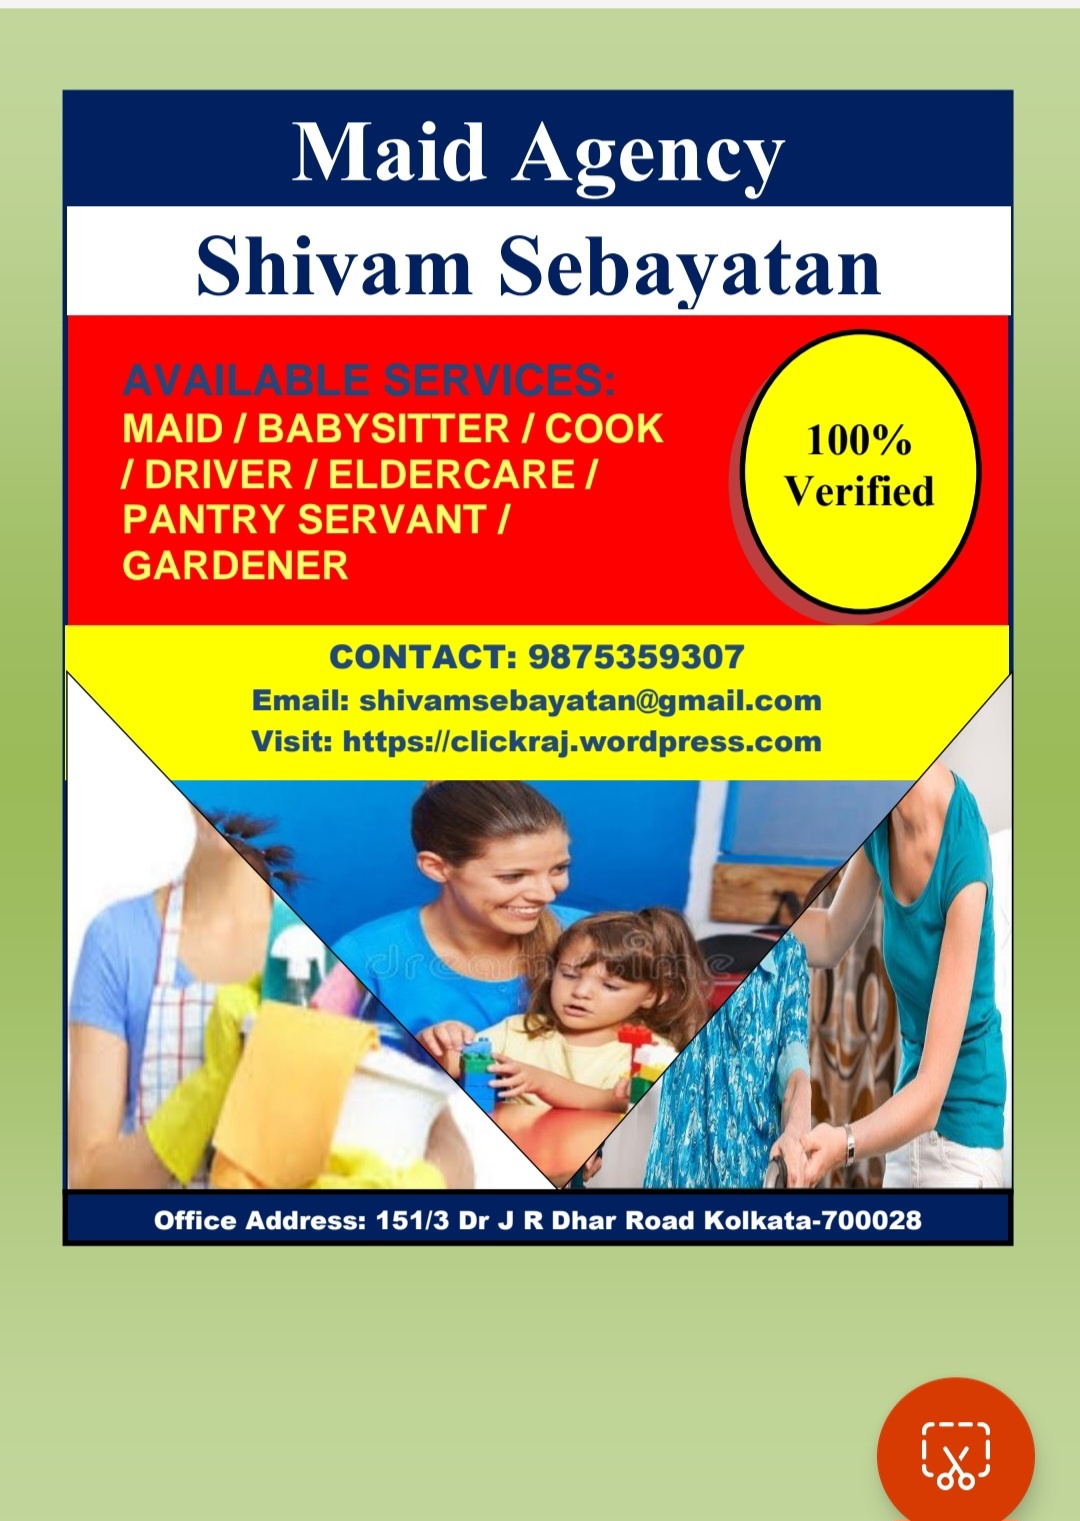 Are You Looking For House Maid, Babysitter Service, Nanny Service!